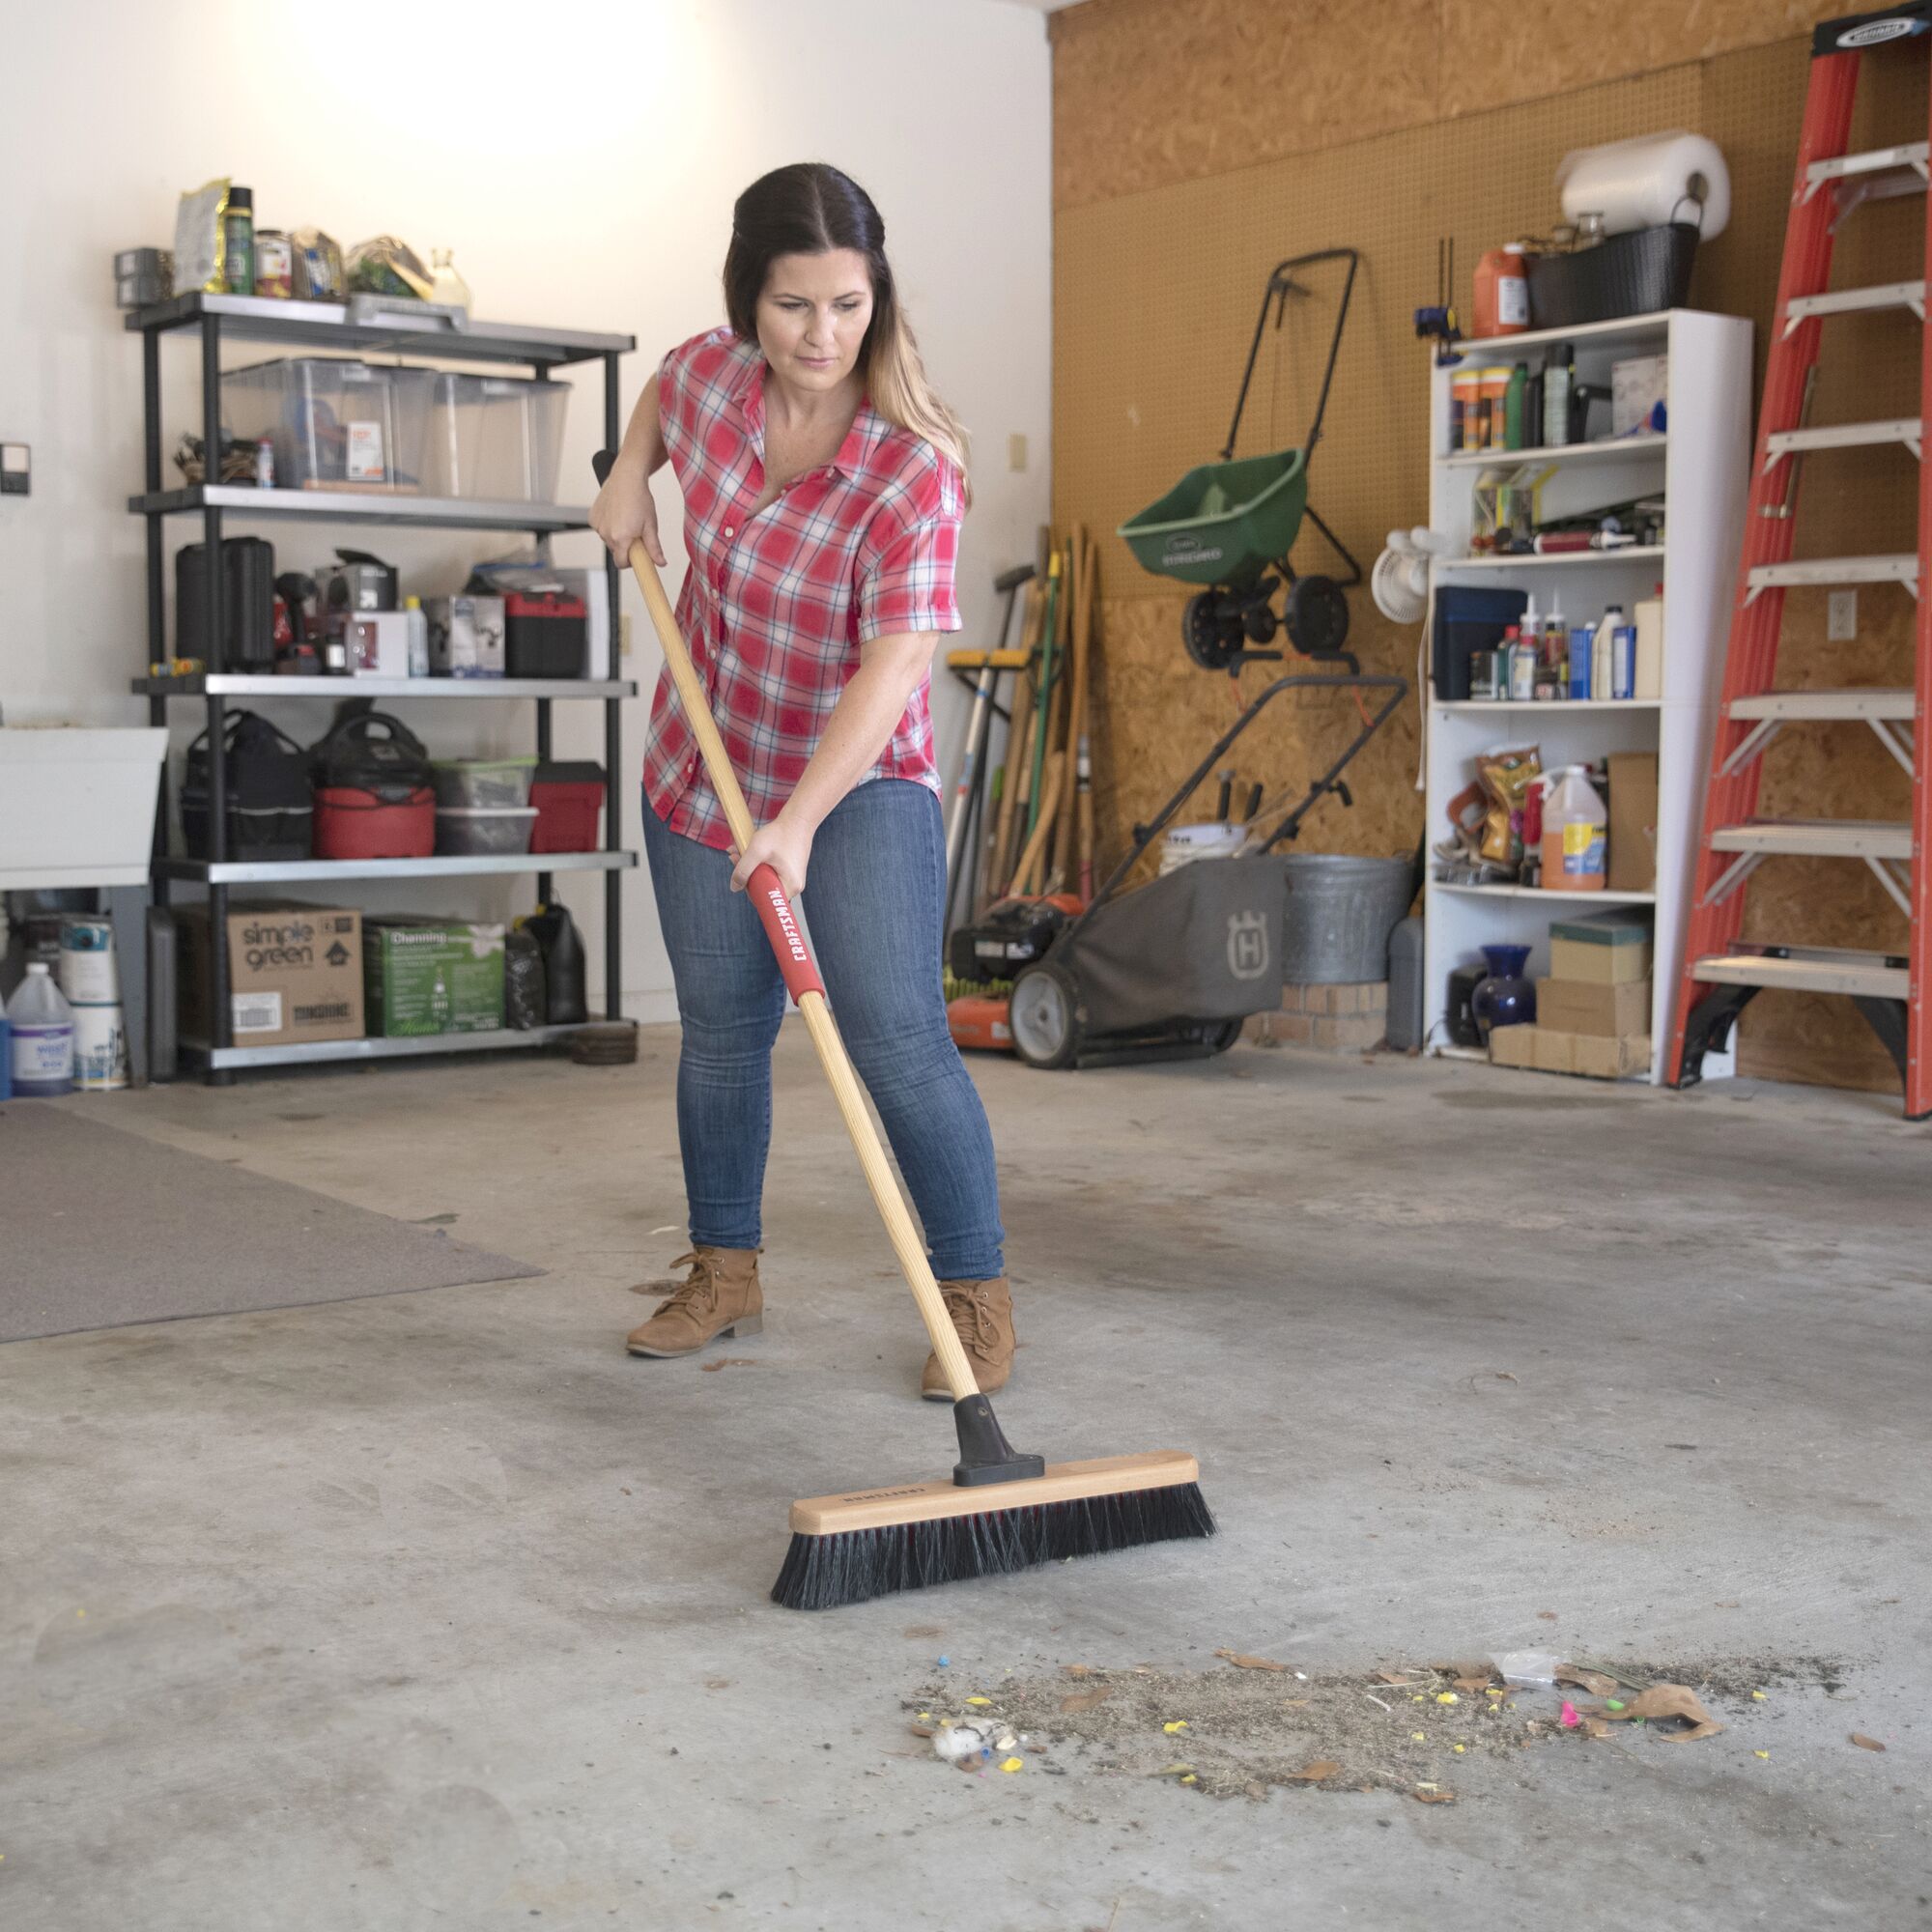 View of CRAFTSMAN Cleaning: Brooms  being used by consumer